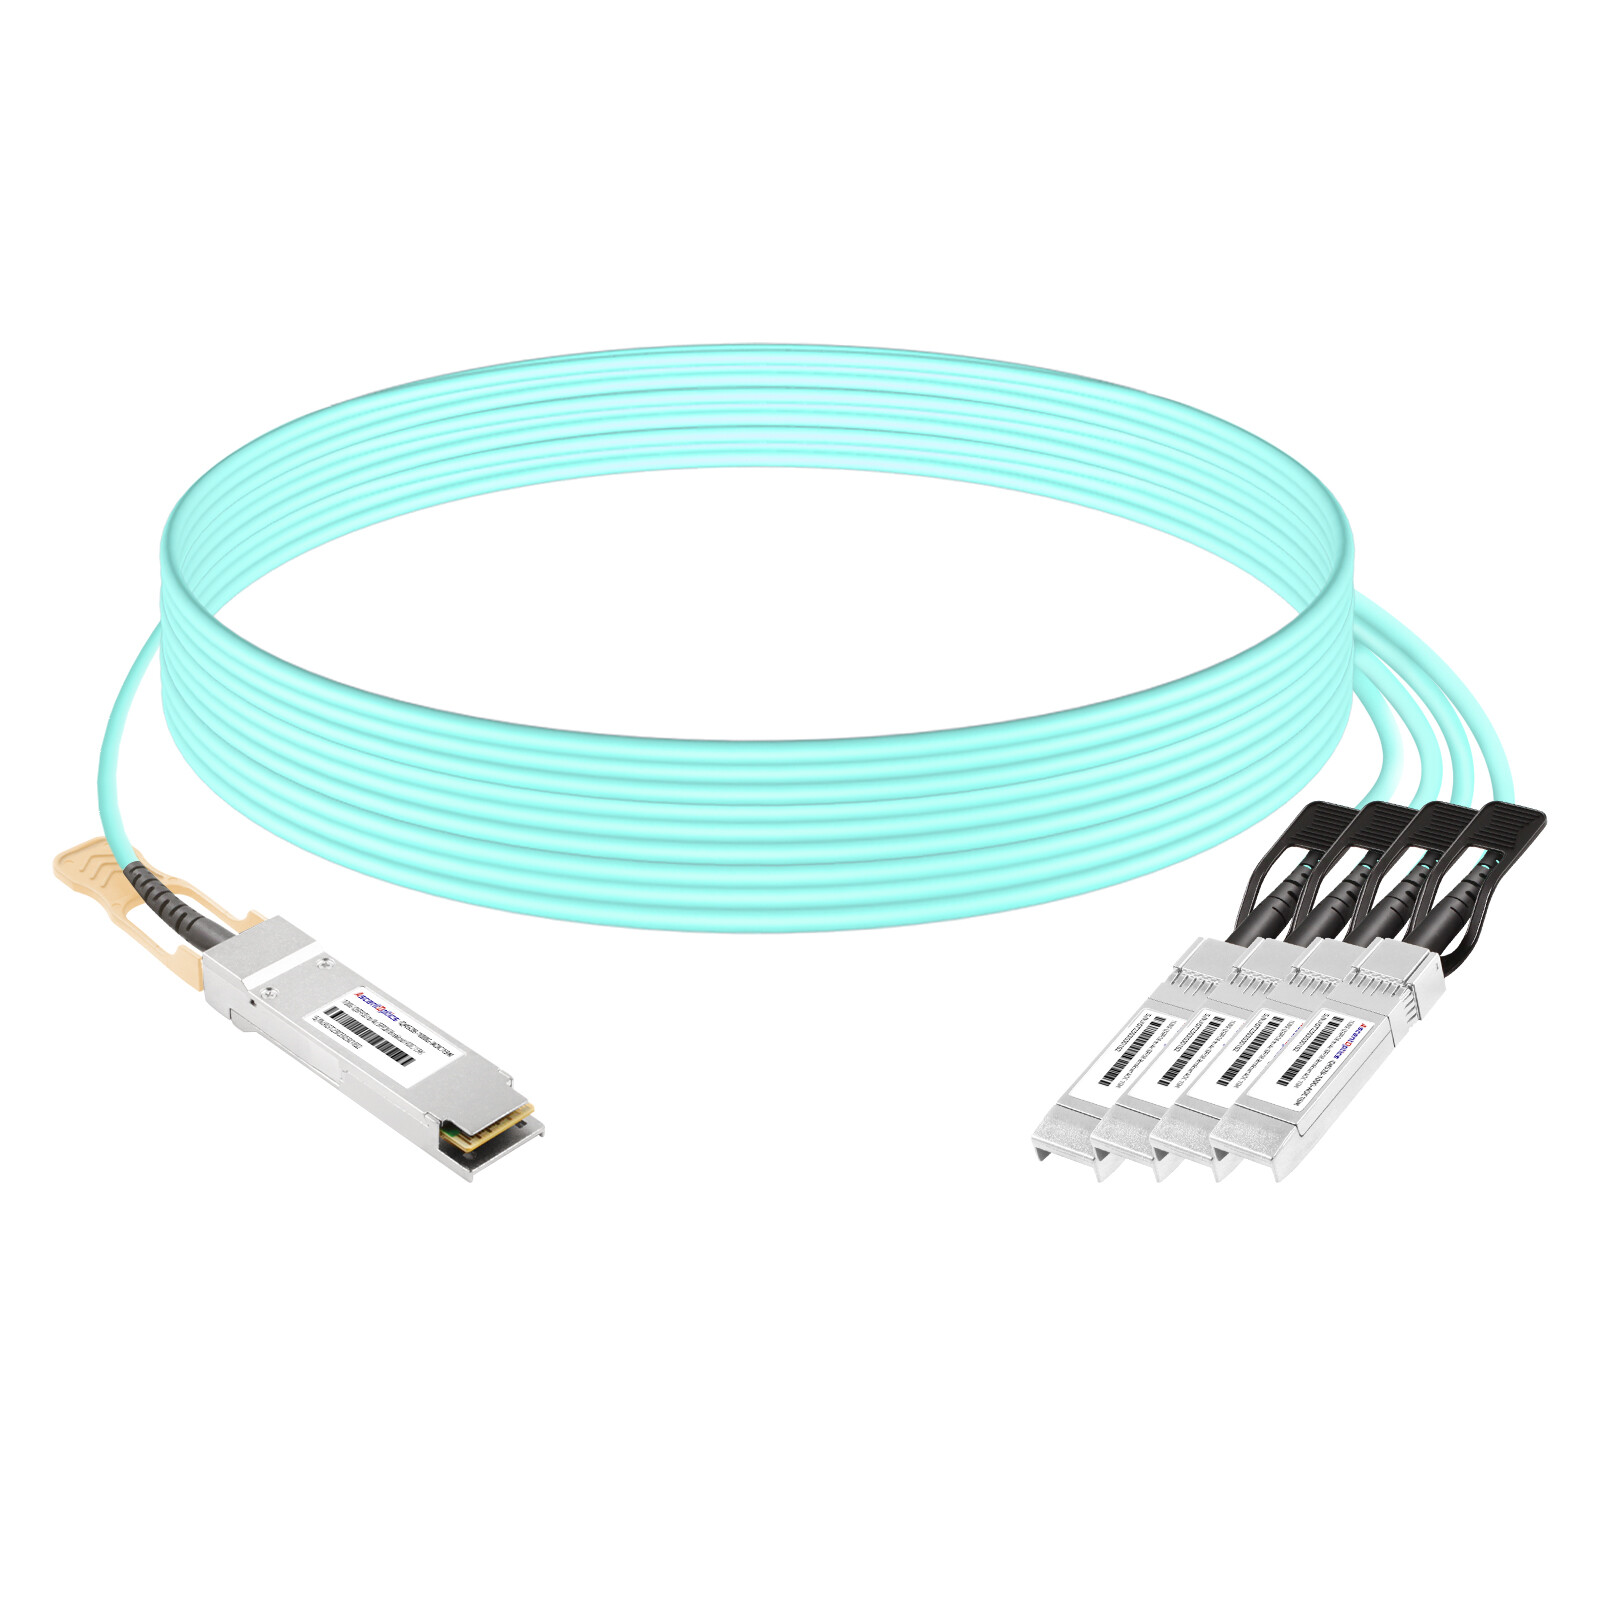 100G QSFP28 to 4x 25G SFP28 Breakout AOC Cable,15 Meters